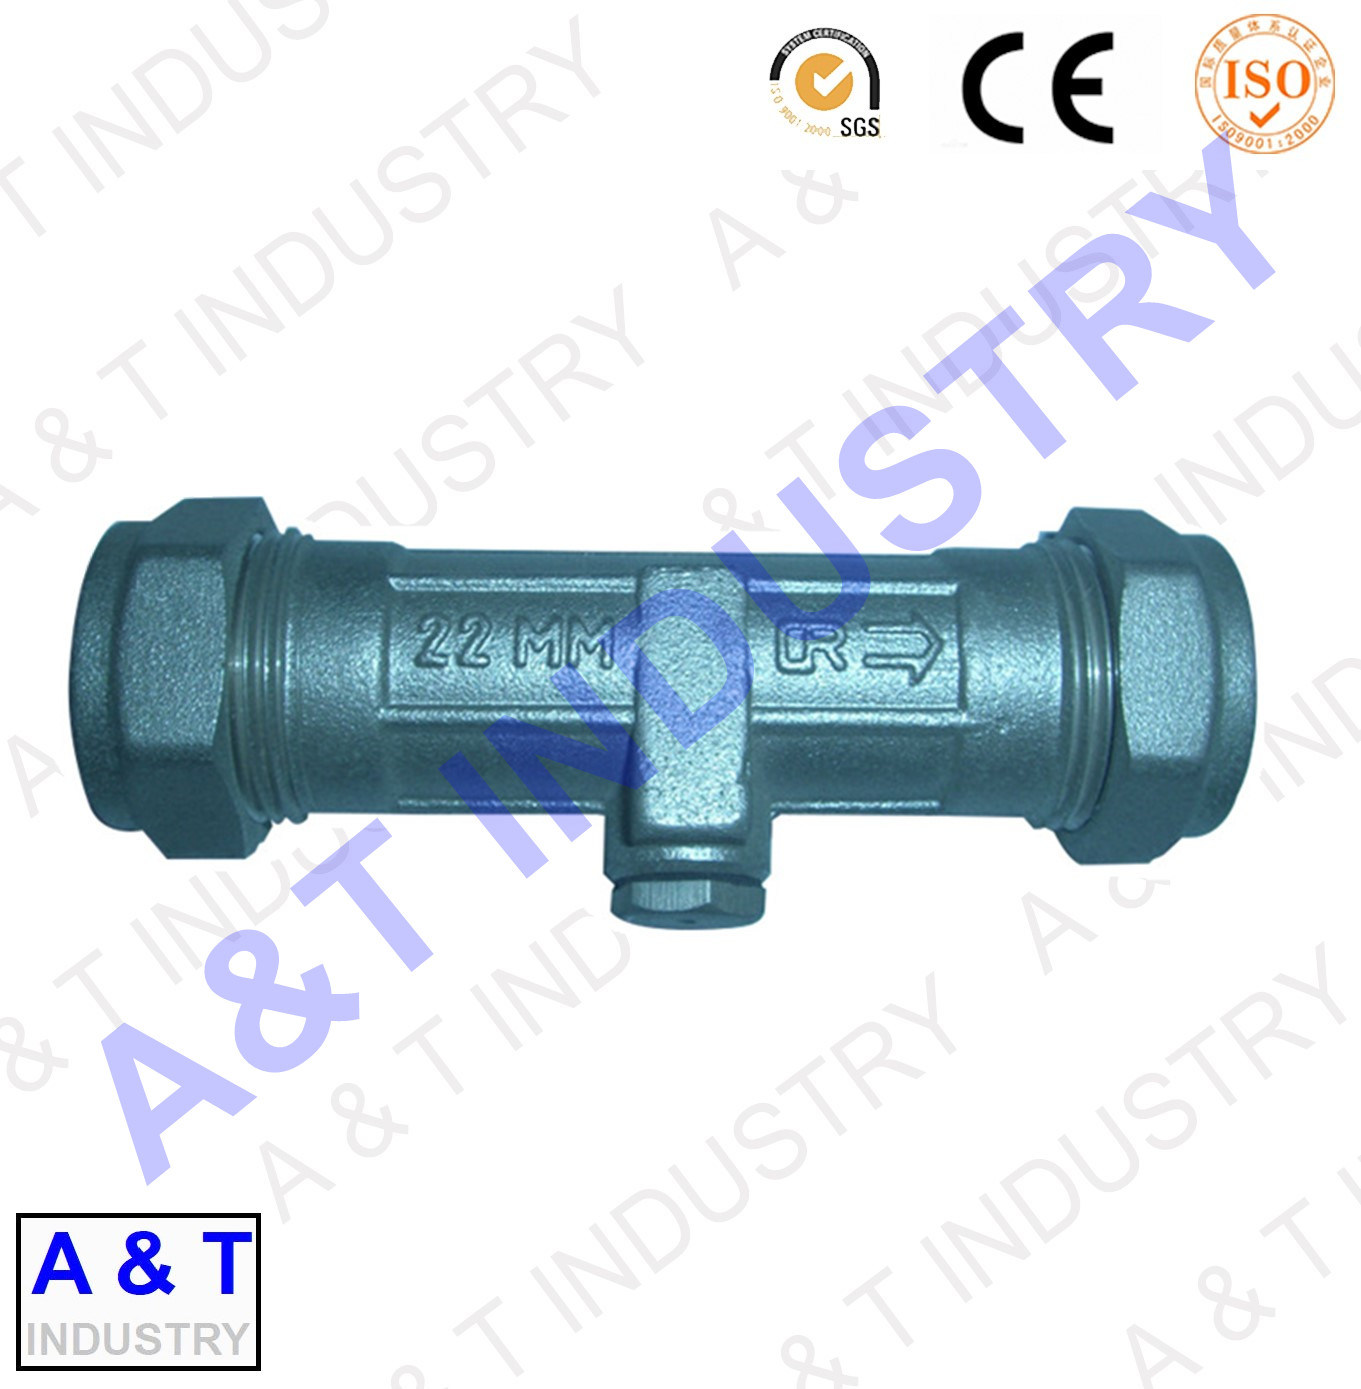 High Quality China OEM Die Casting Part